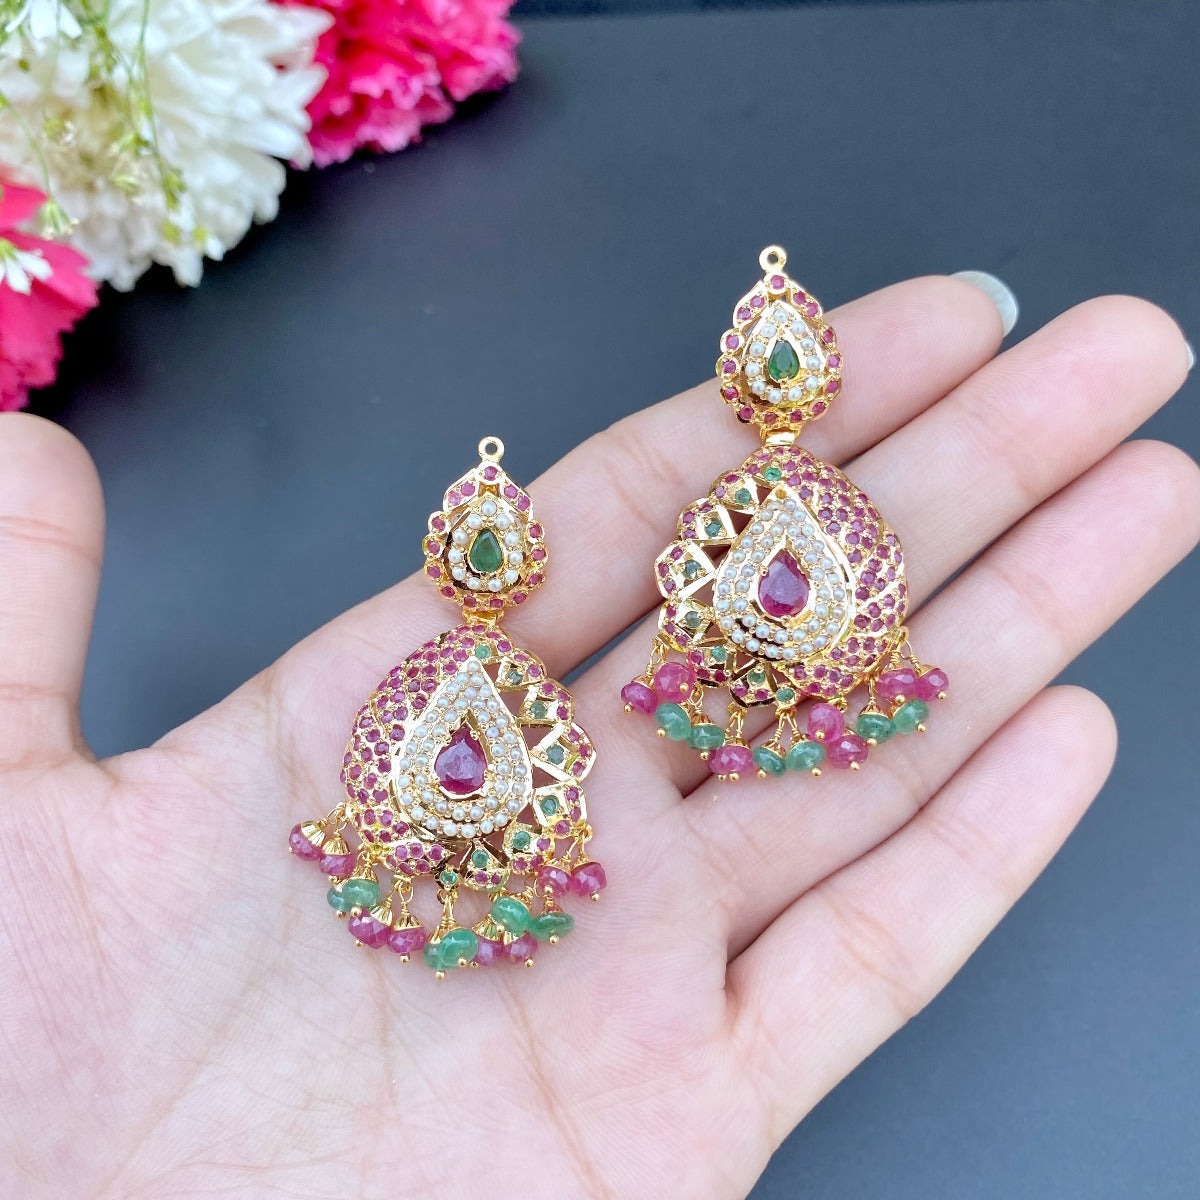 earrings for the mughal necklace